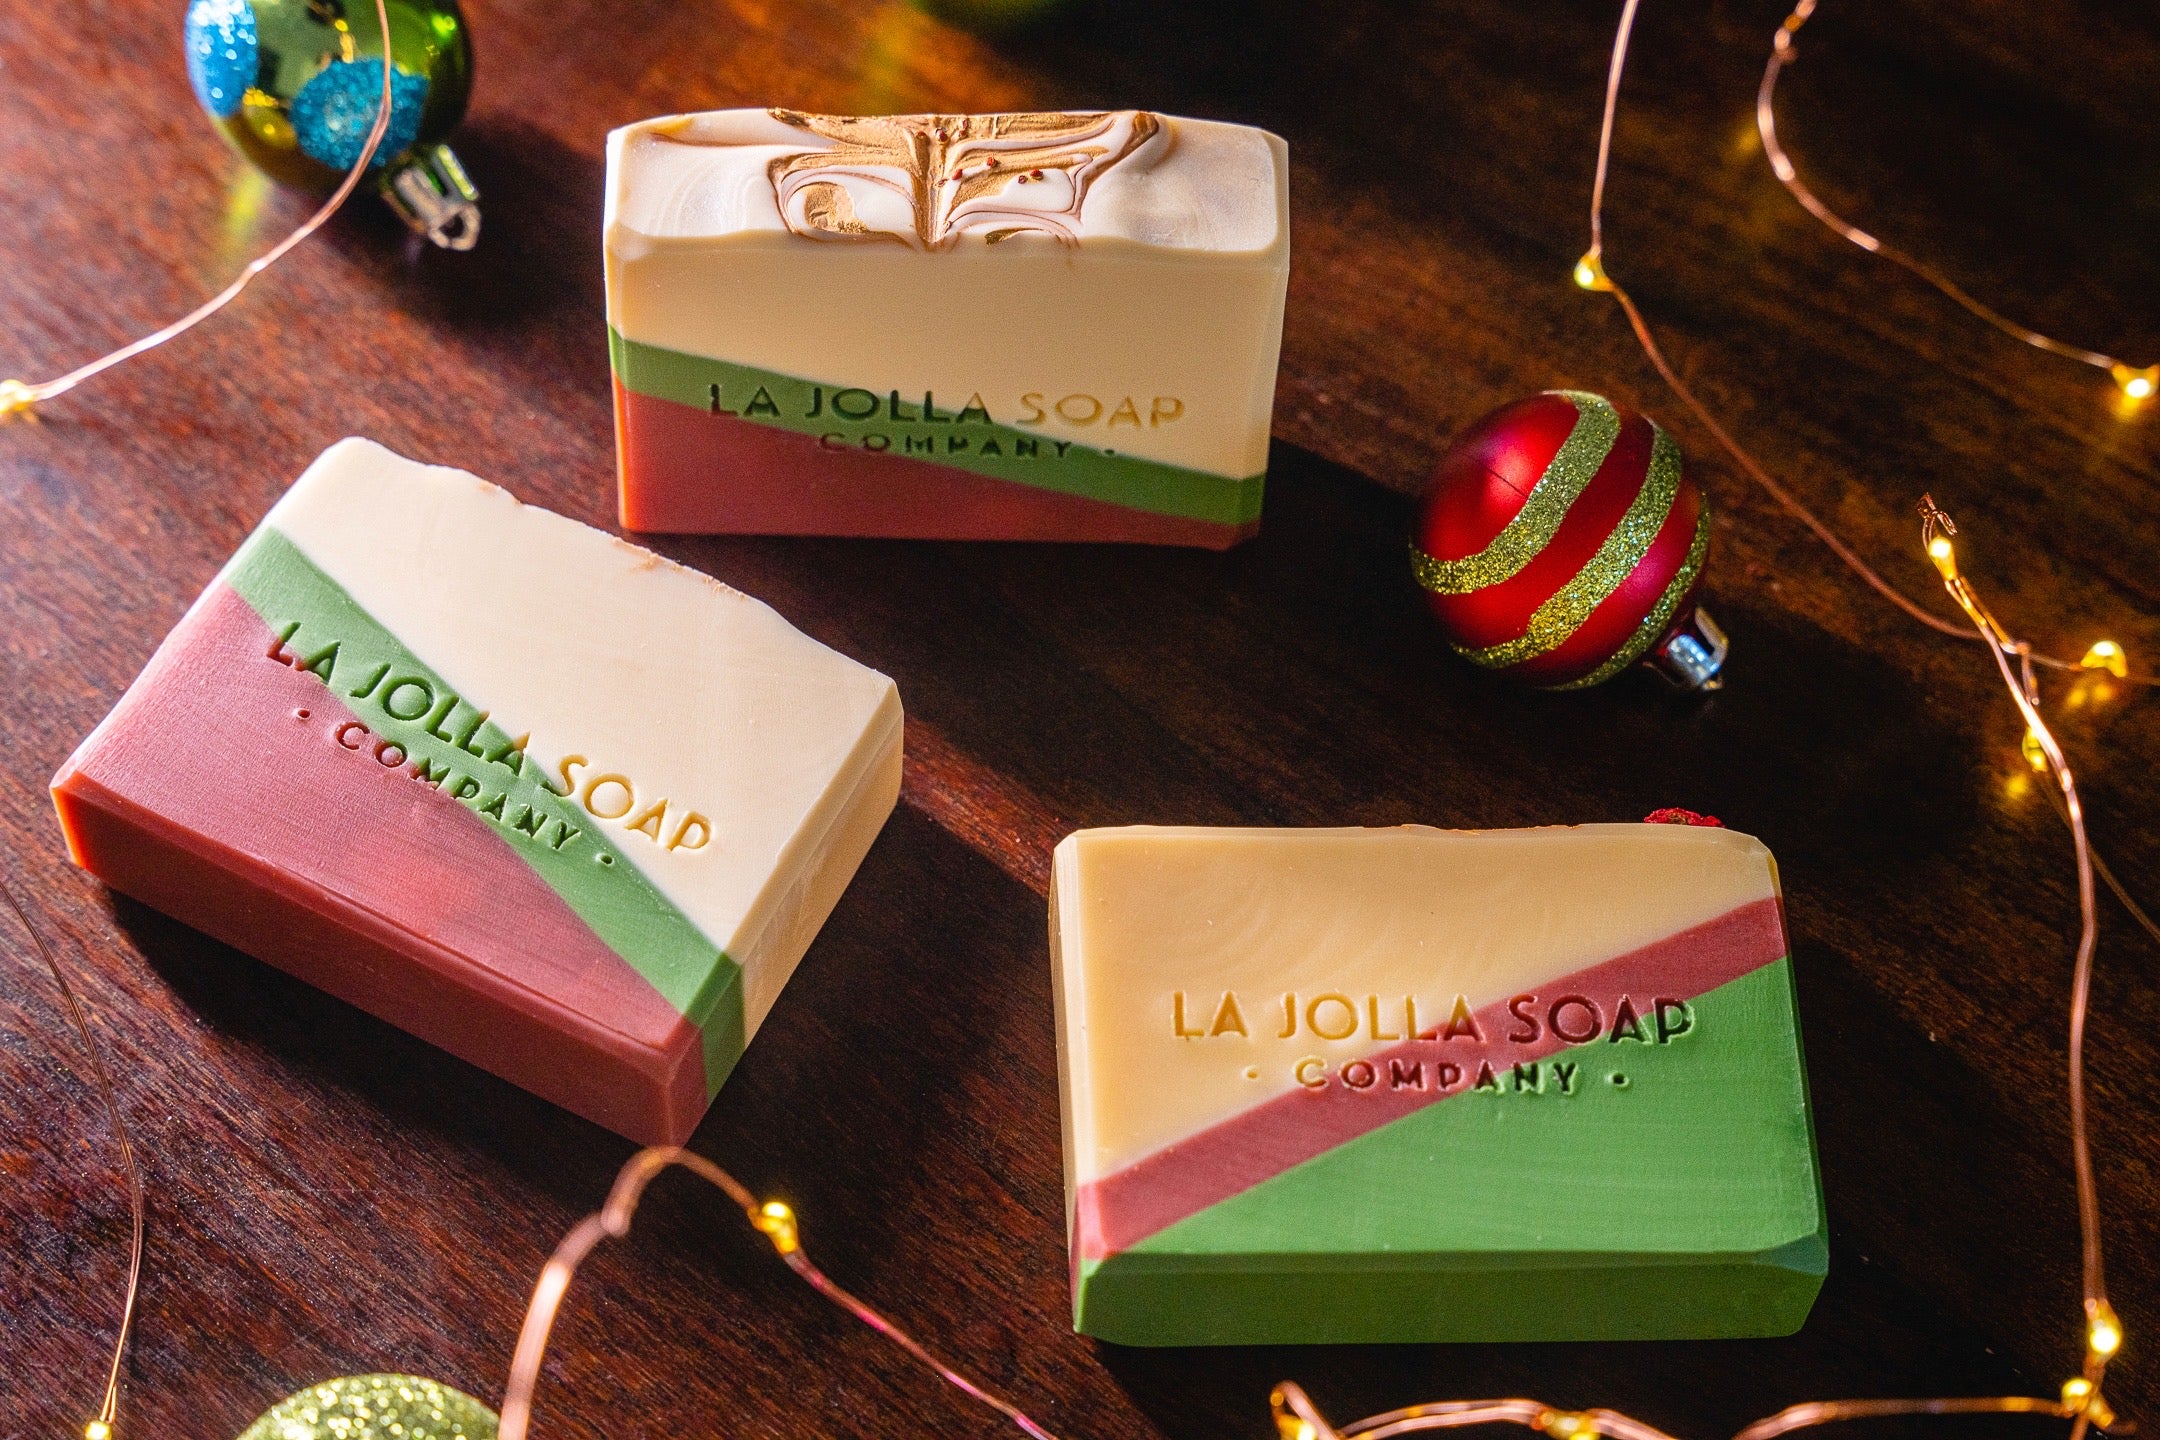 A beautiful bar with a creamy lather, rich in antioxidants and hydrating lipids. The scent is uplifting and festive with a pure essential oil blend of cinnamon bark, cedarwood and peppermint. Perfect sink-side or bath soap bar, keeping you and your guests clean and your powder room smelling fresh into the new year!